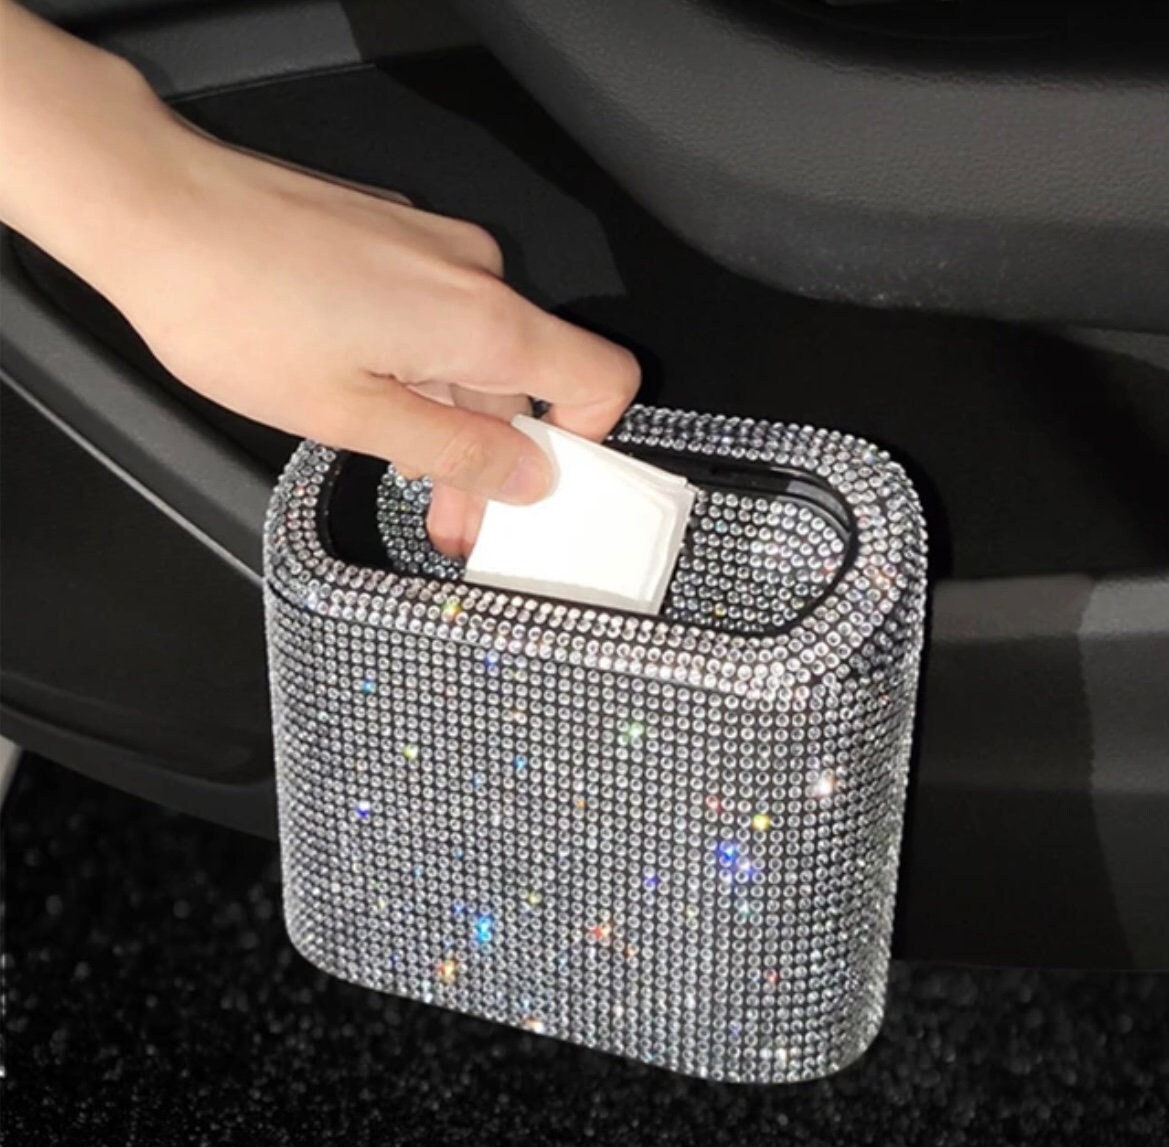 Bling Car Accessories 